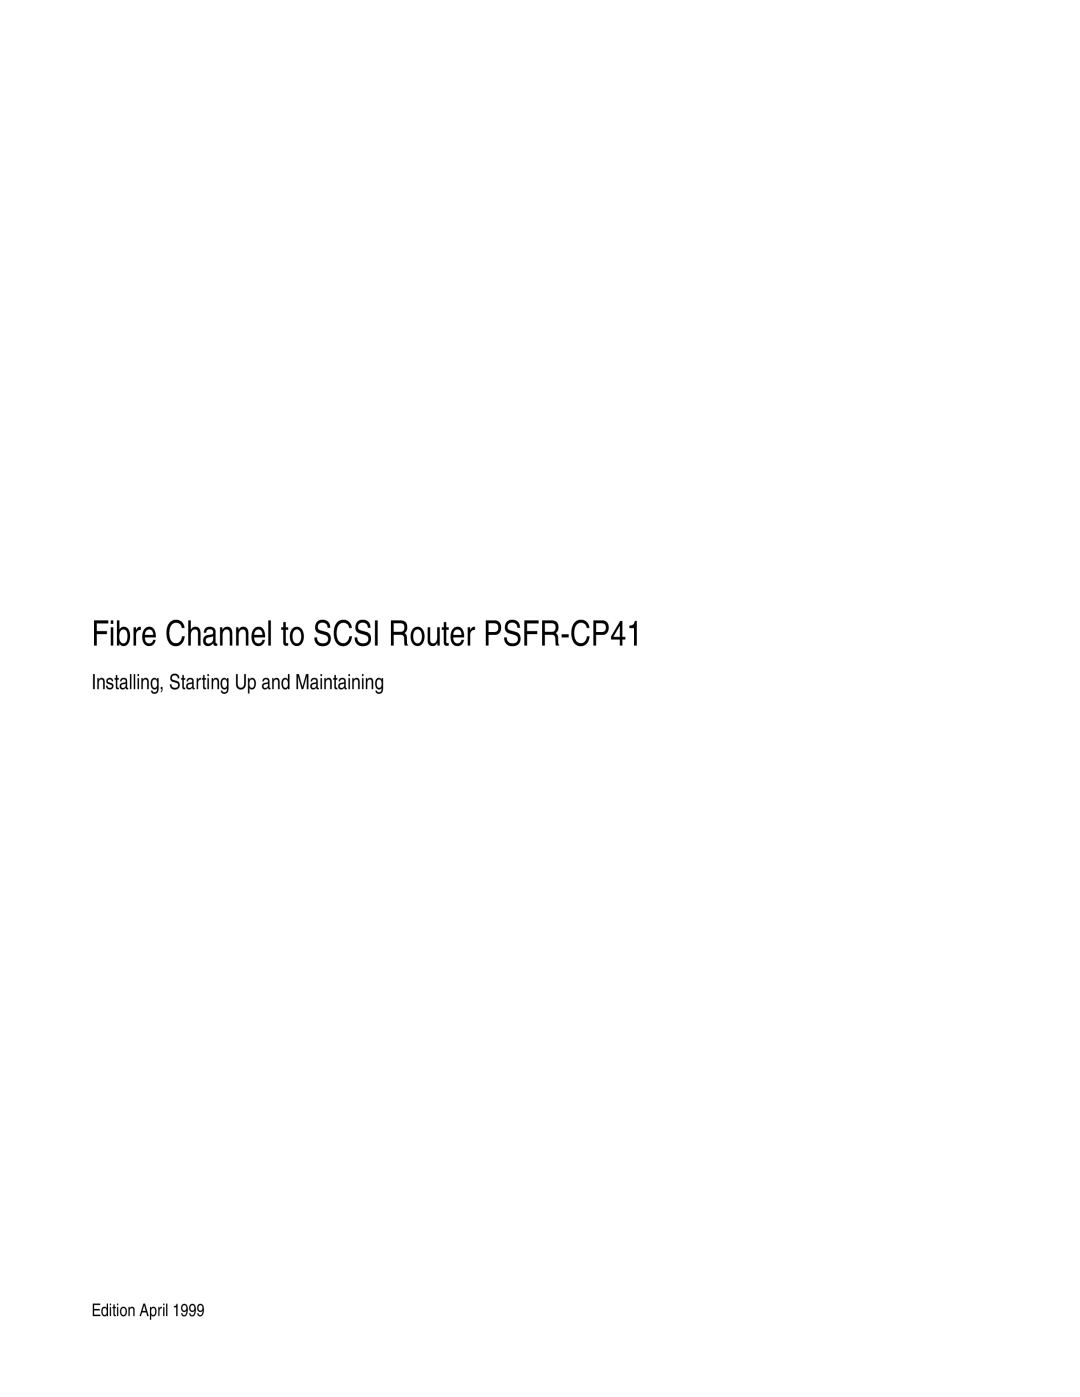 Siemens manual Fibre Channel to Scsi Router PSFR-CP41 